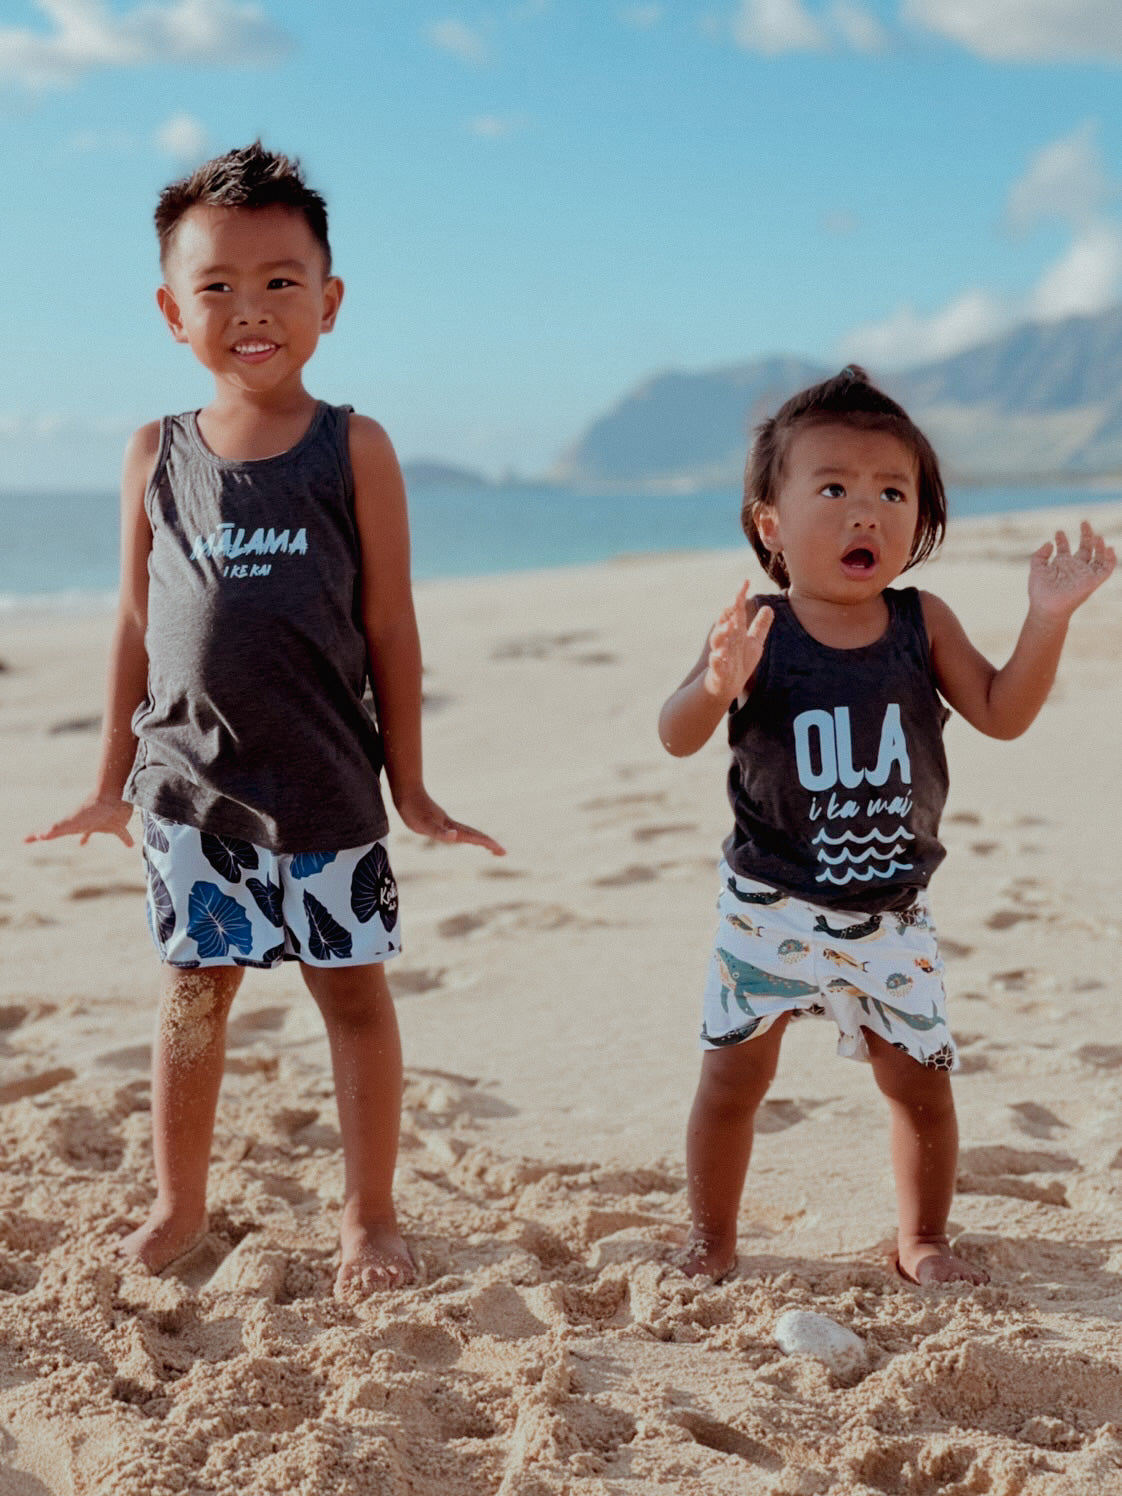 two brothers wearing their malama i ke kai and ola i ka wai tank tops. They are standing on the shoreline at the beach.